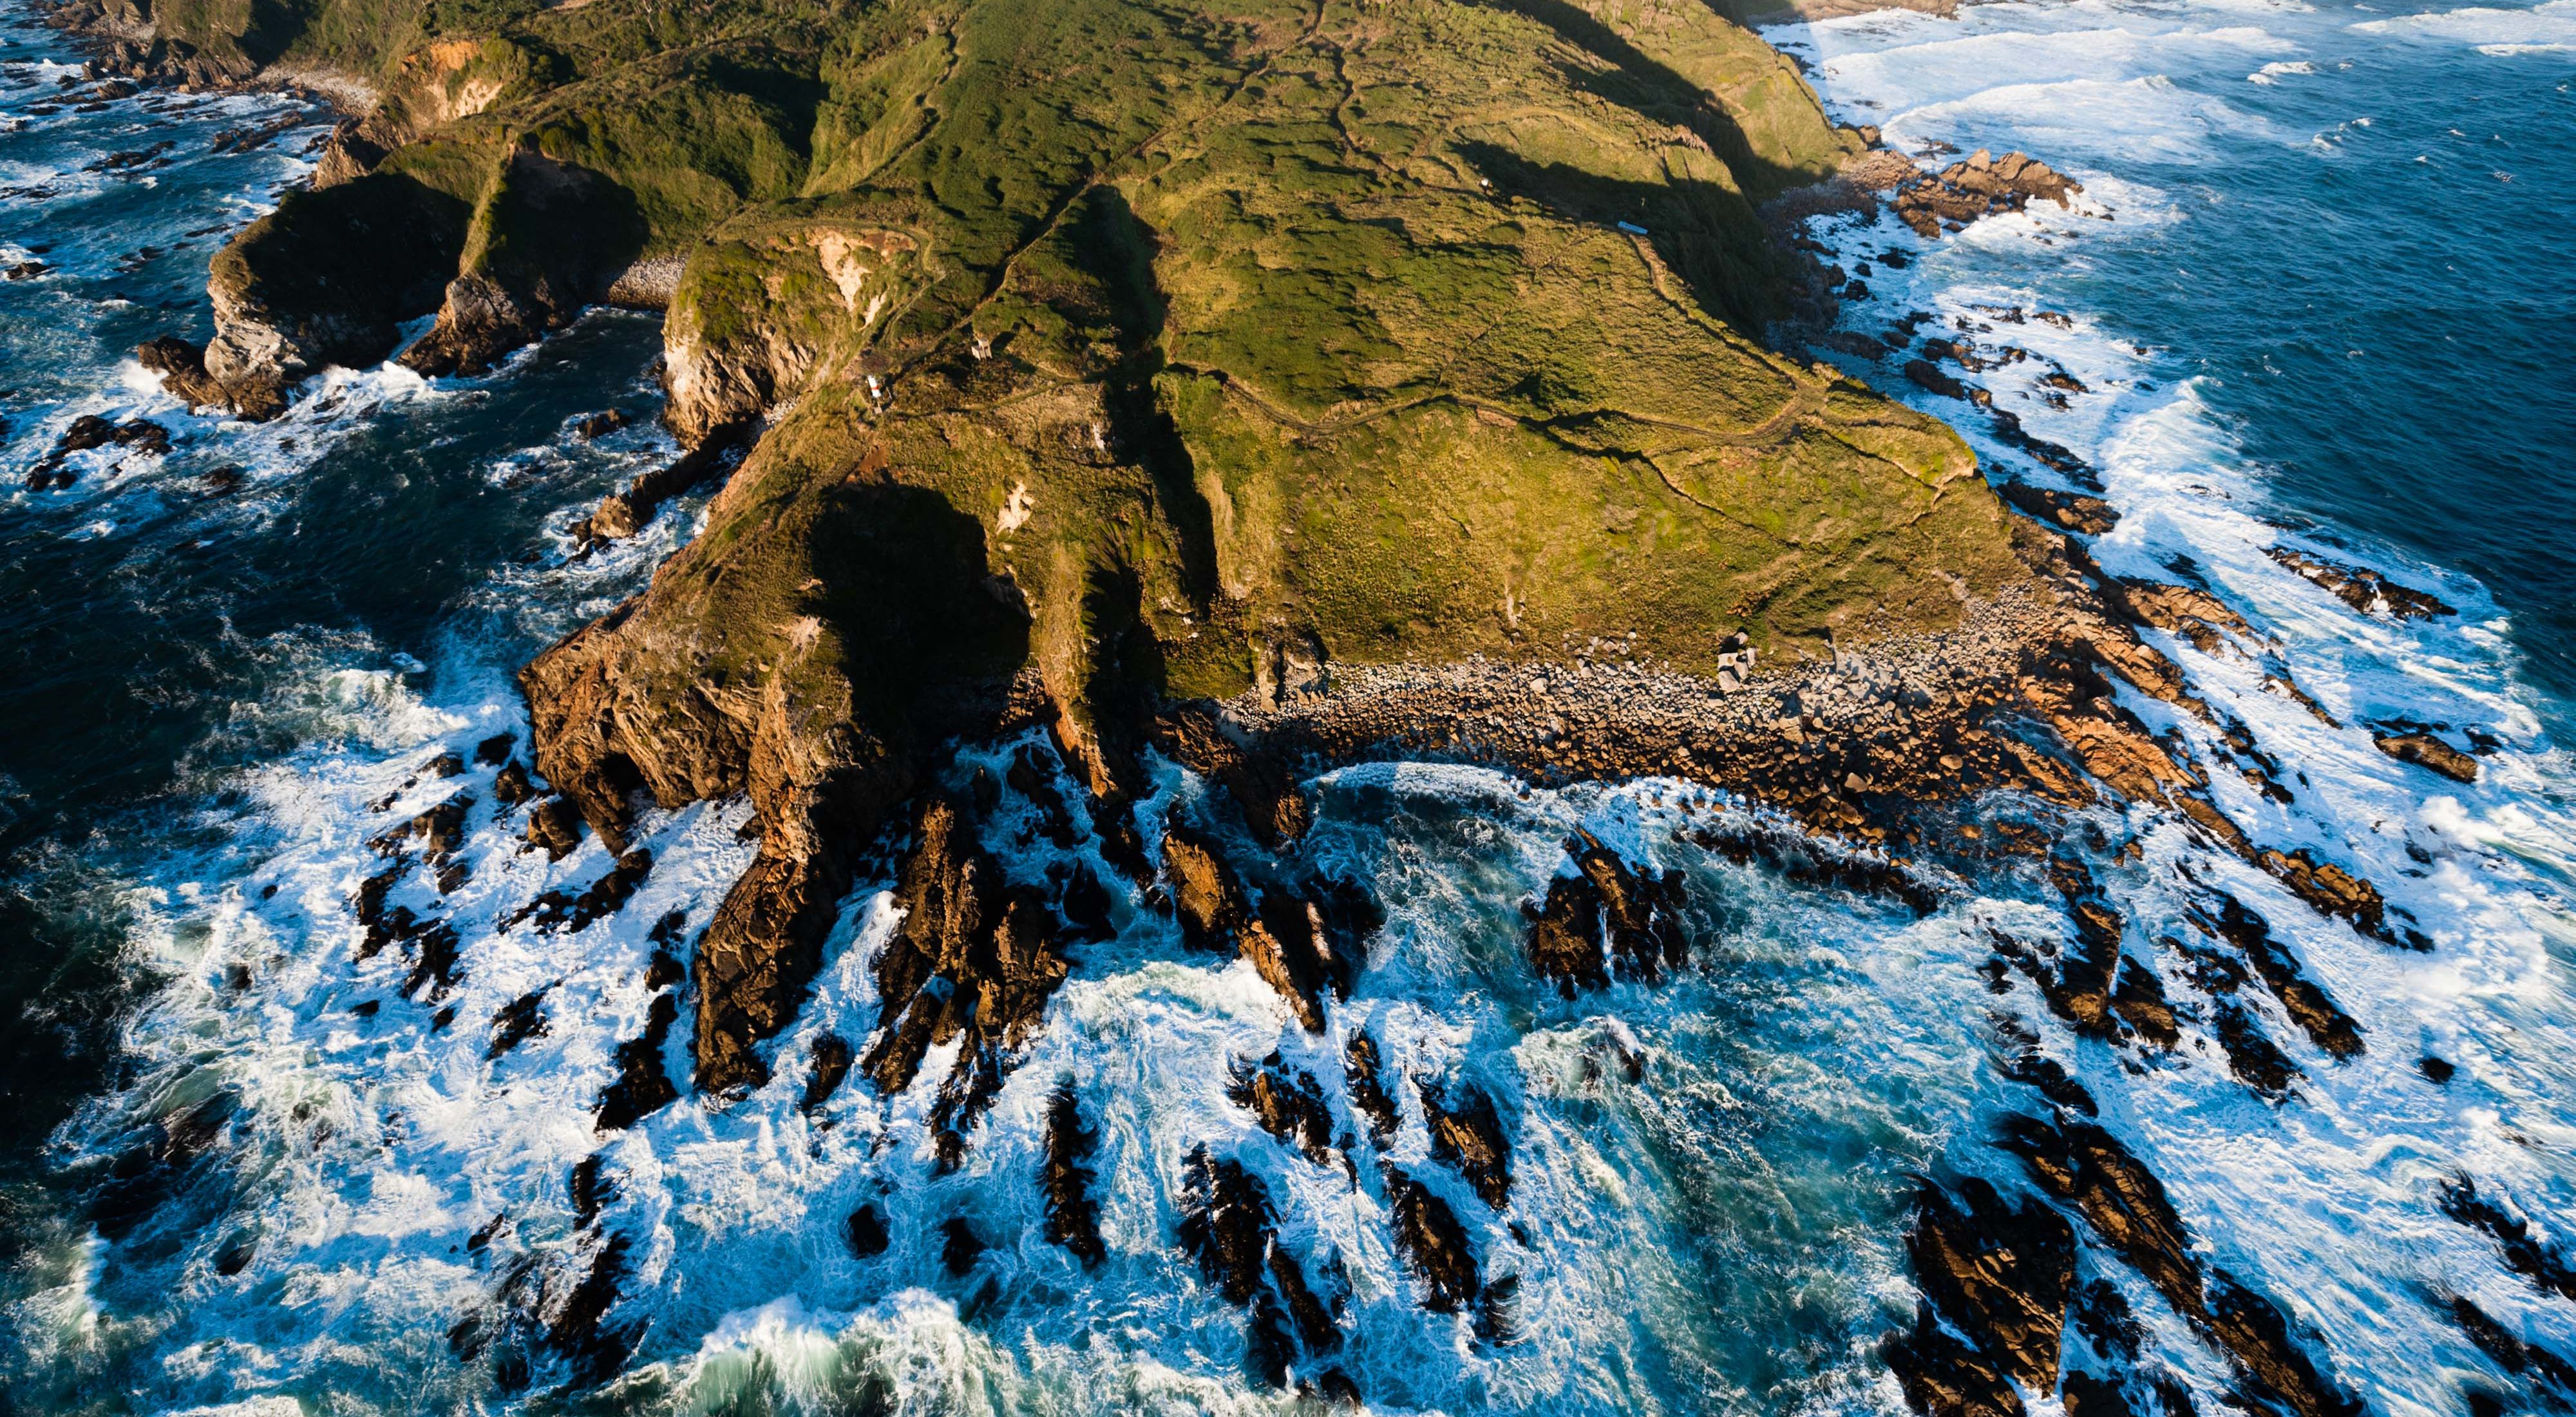  An aerial view of Colun Beach in the Valdivian Coastal Reserve, Los Rios, Chile. Photo credit: ©2012 Nick Hall        